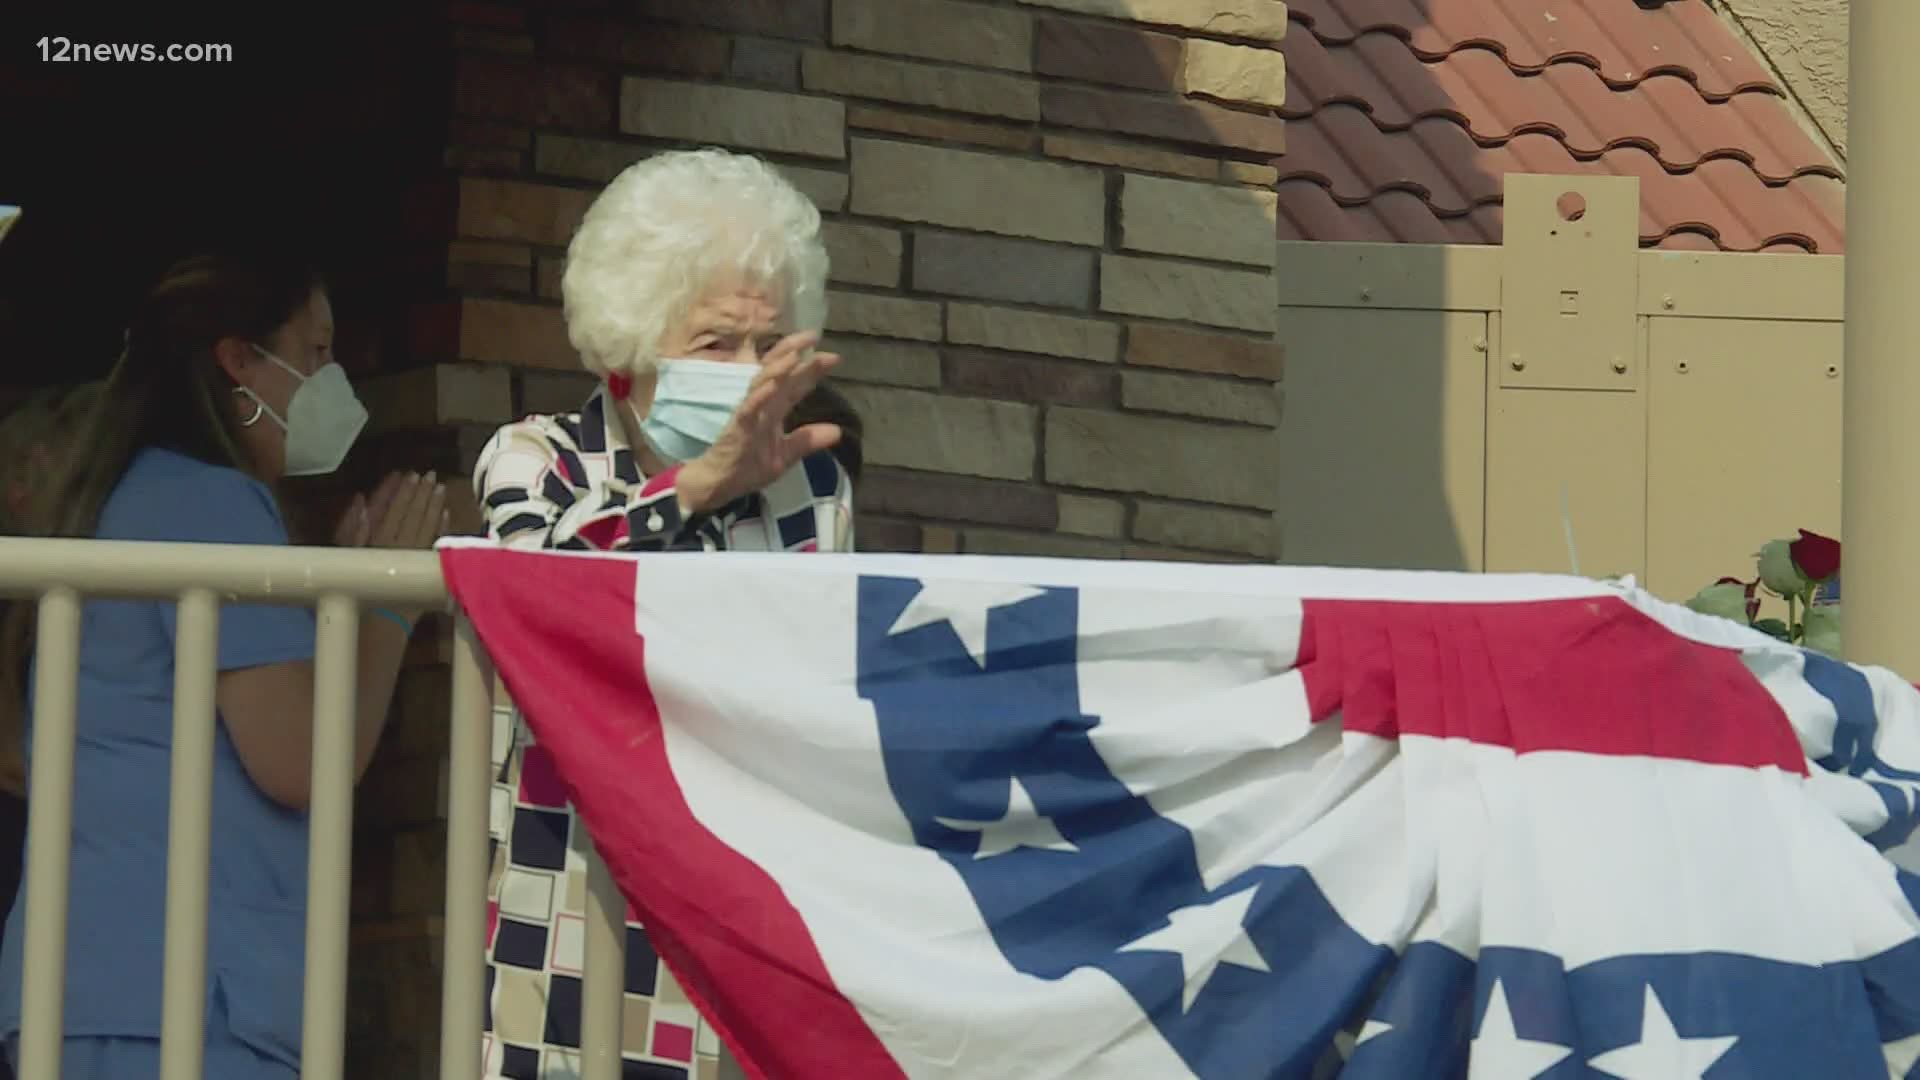 Athena Wright is a World War II veteran who was honored with her very own parade in Scottsdale. Friends, family and the City of Scottsdale came out to honor her.